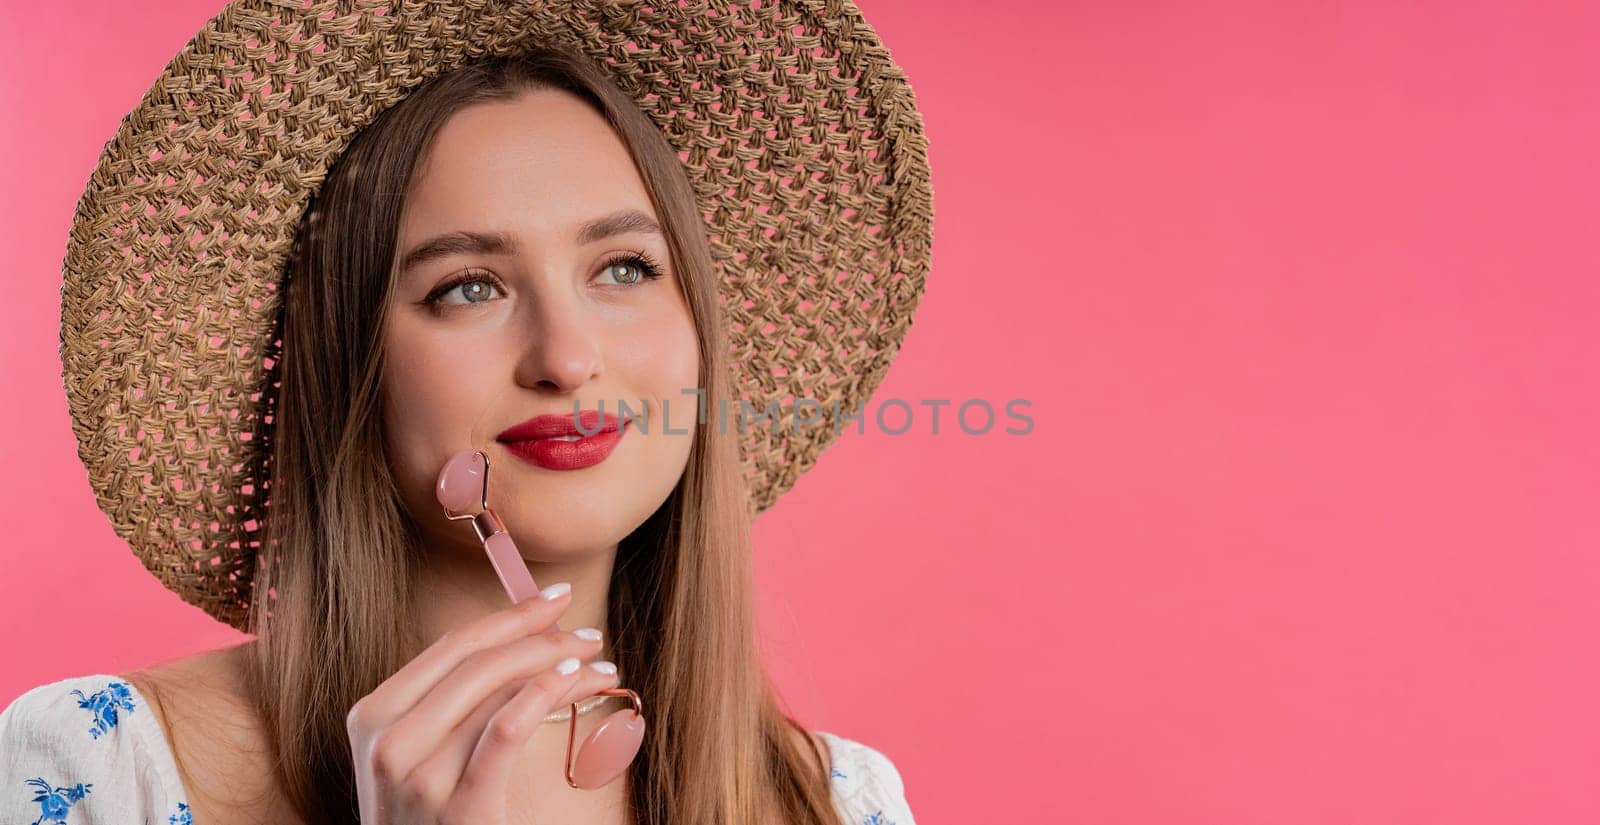 Blonde woman doing face massage with rose quartz stone roller on pink background. Facial self care, beauty rituals, cosmetology, anti aging and anti-wrinkle treatment